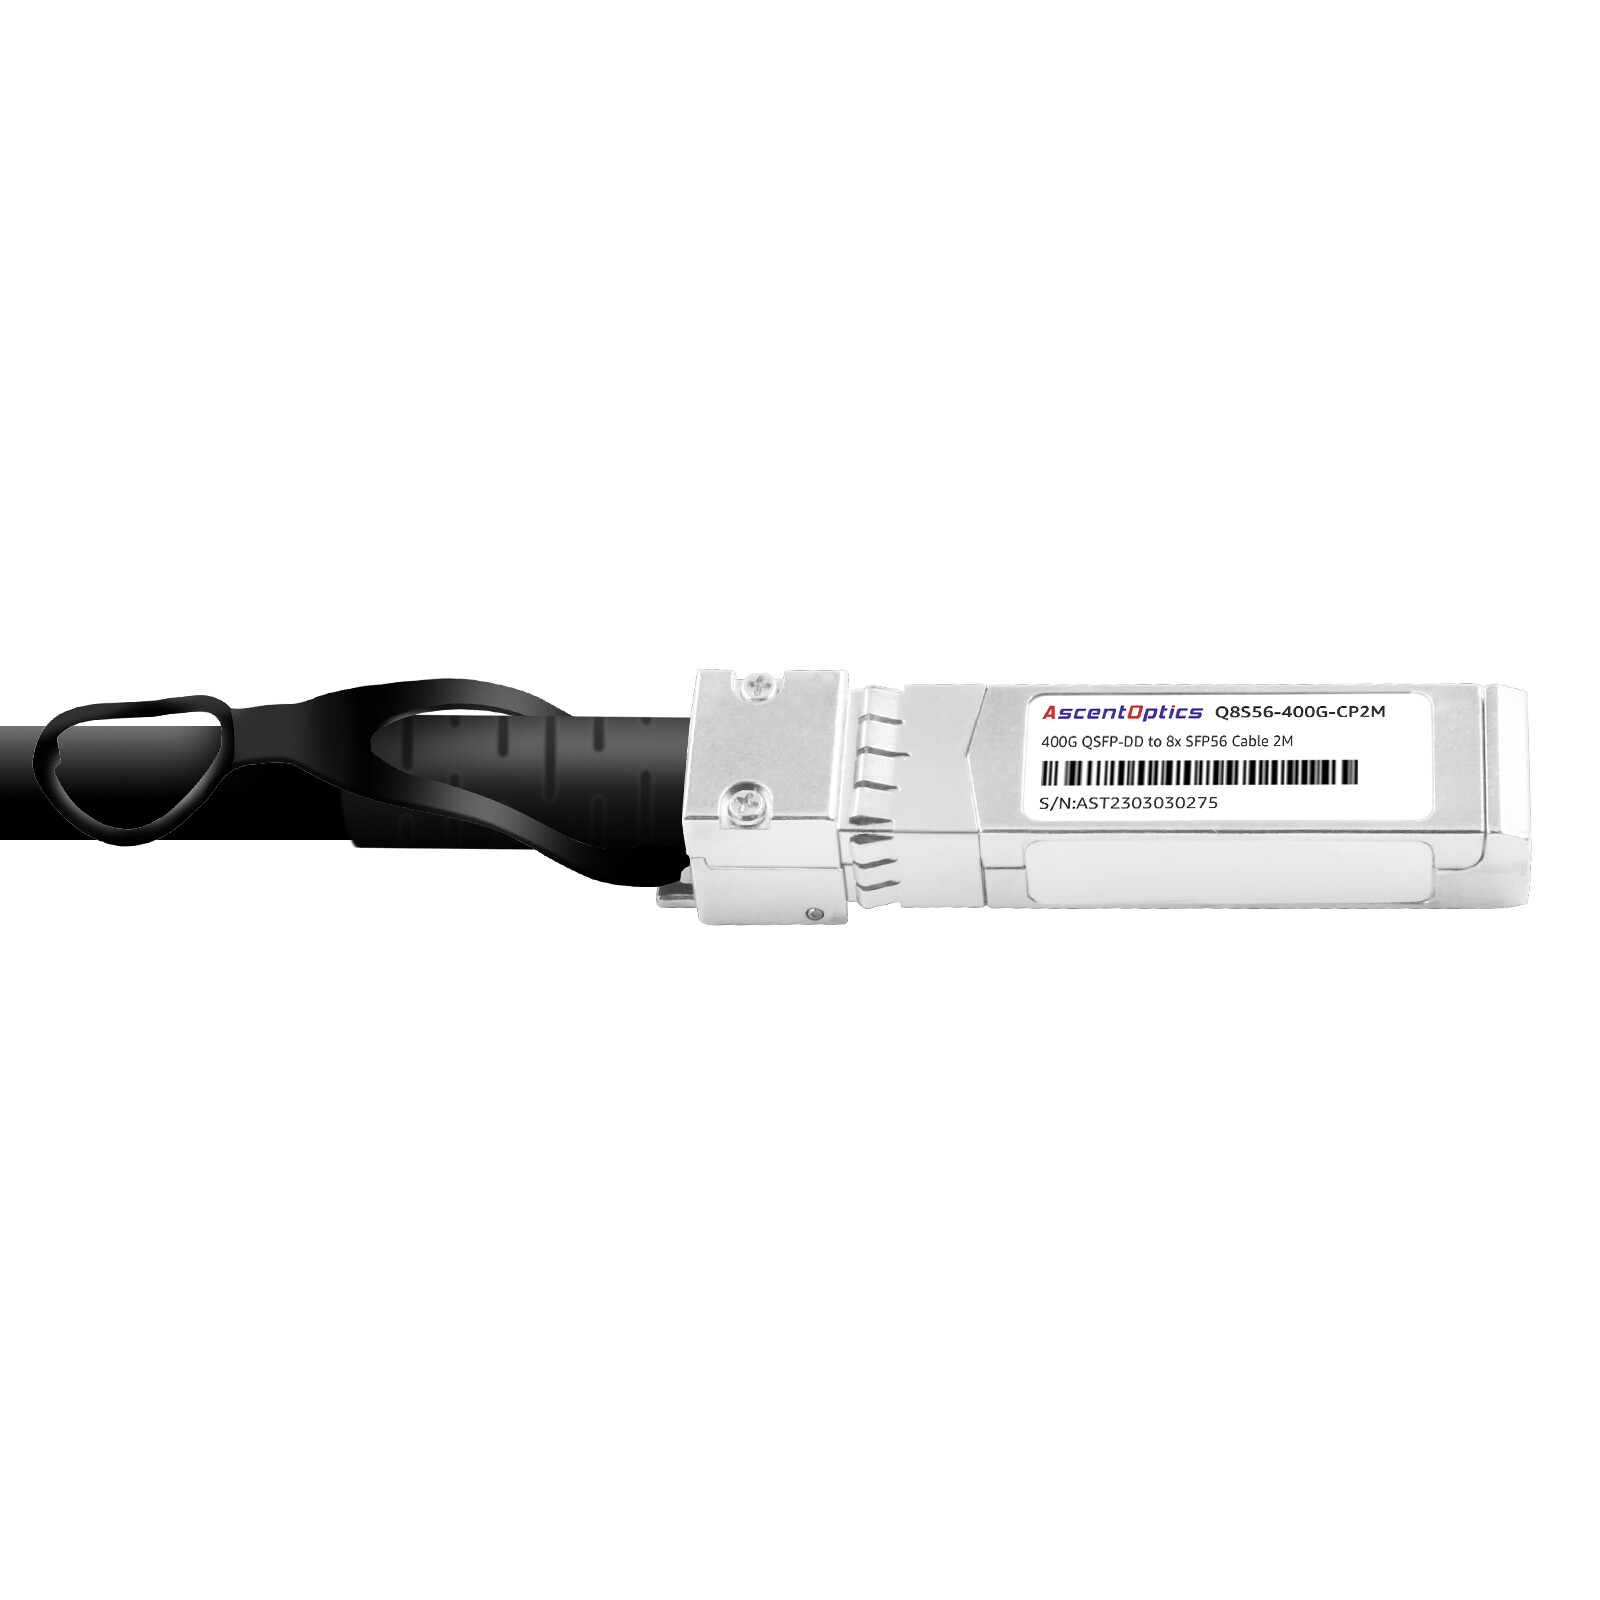 400G QSFP-DD to 8x 50G SFP56 Copper Breakout Cable,2 Meters,Passive